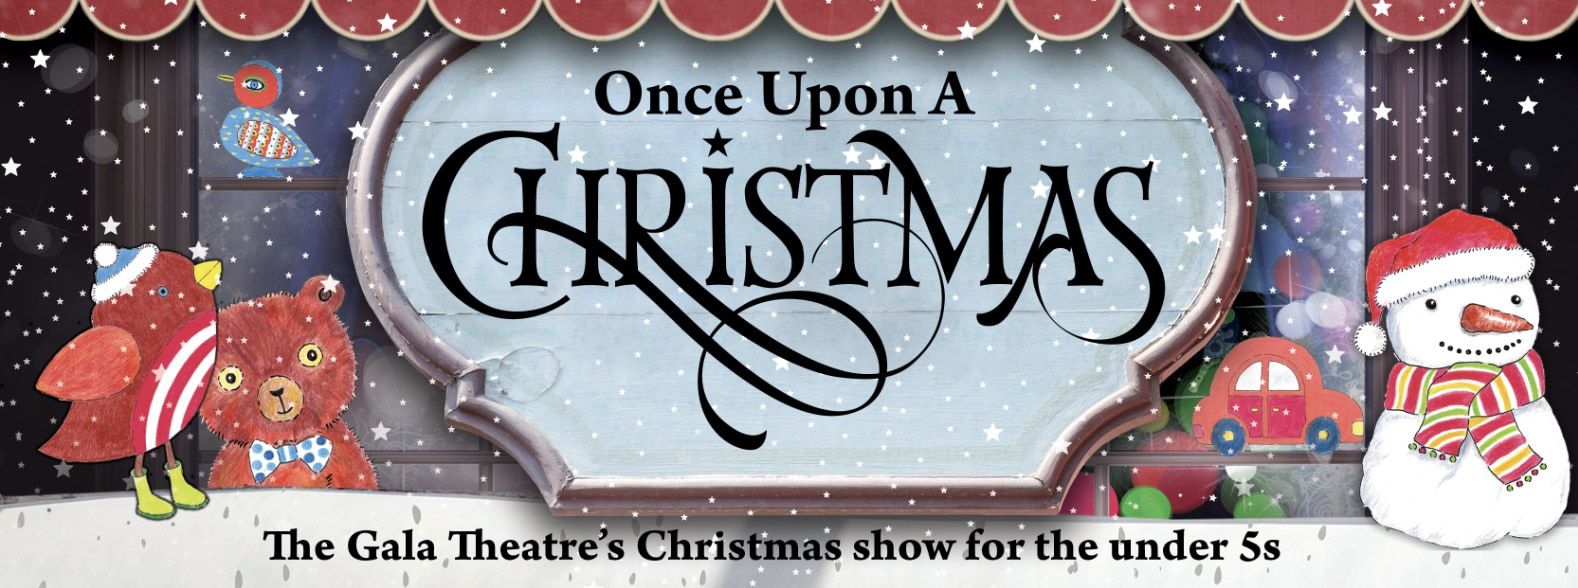 Once Upon a Christmas | A Christmas show for the under 5’s in Durham City